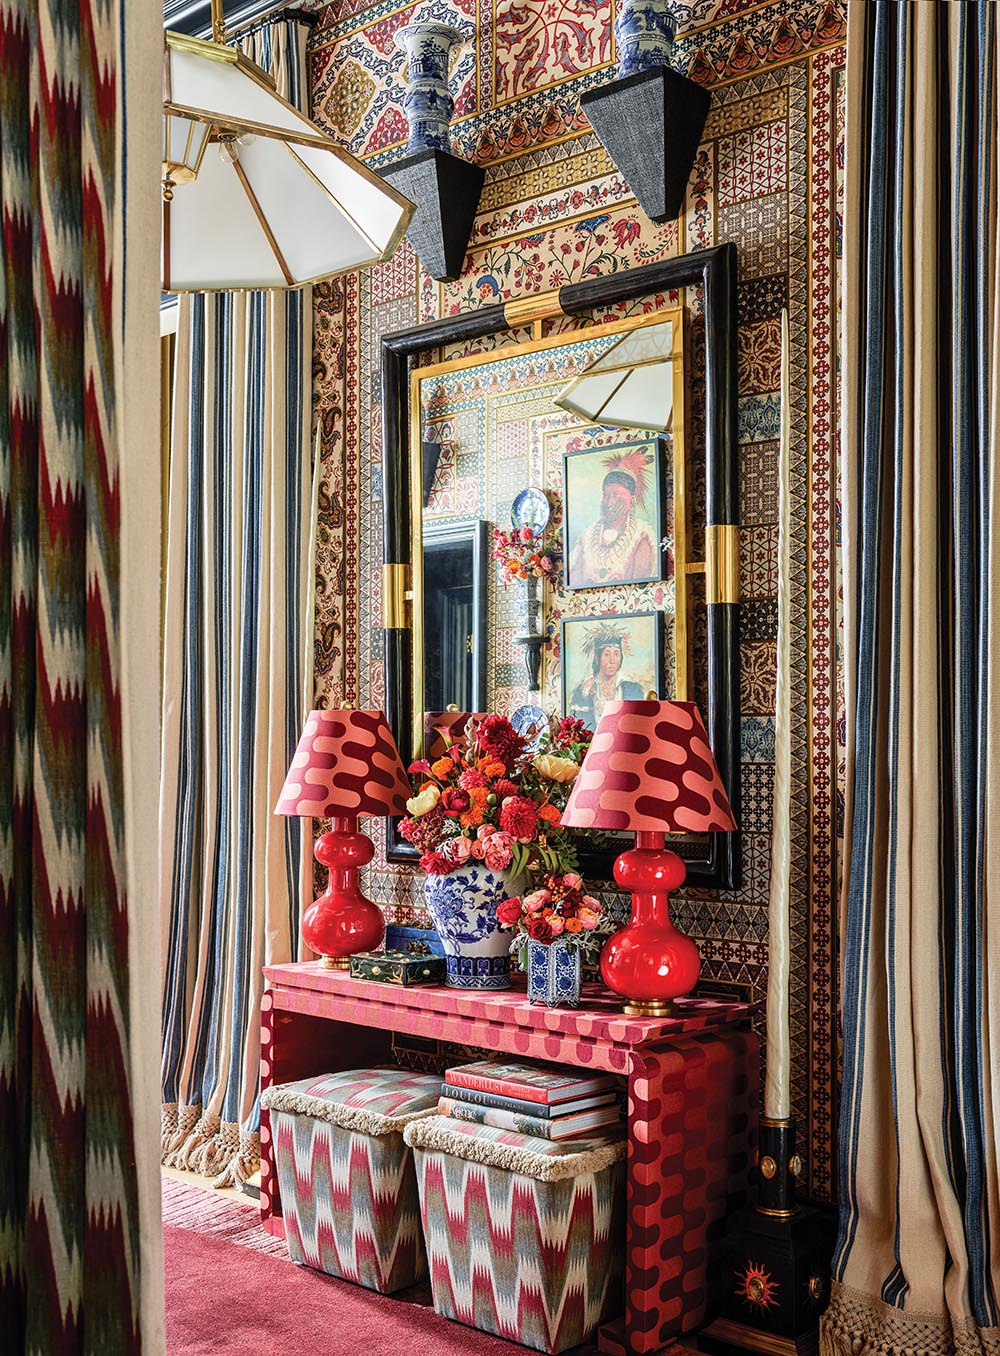 A custom console and lampshades brings in a dash of mod while echoing the color of the rug from The Rug Company. The chandelier is from Visual Comfort & Co.